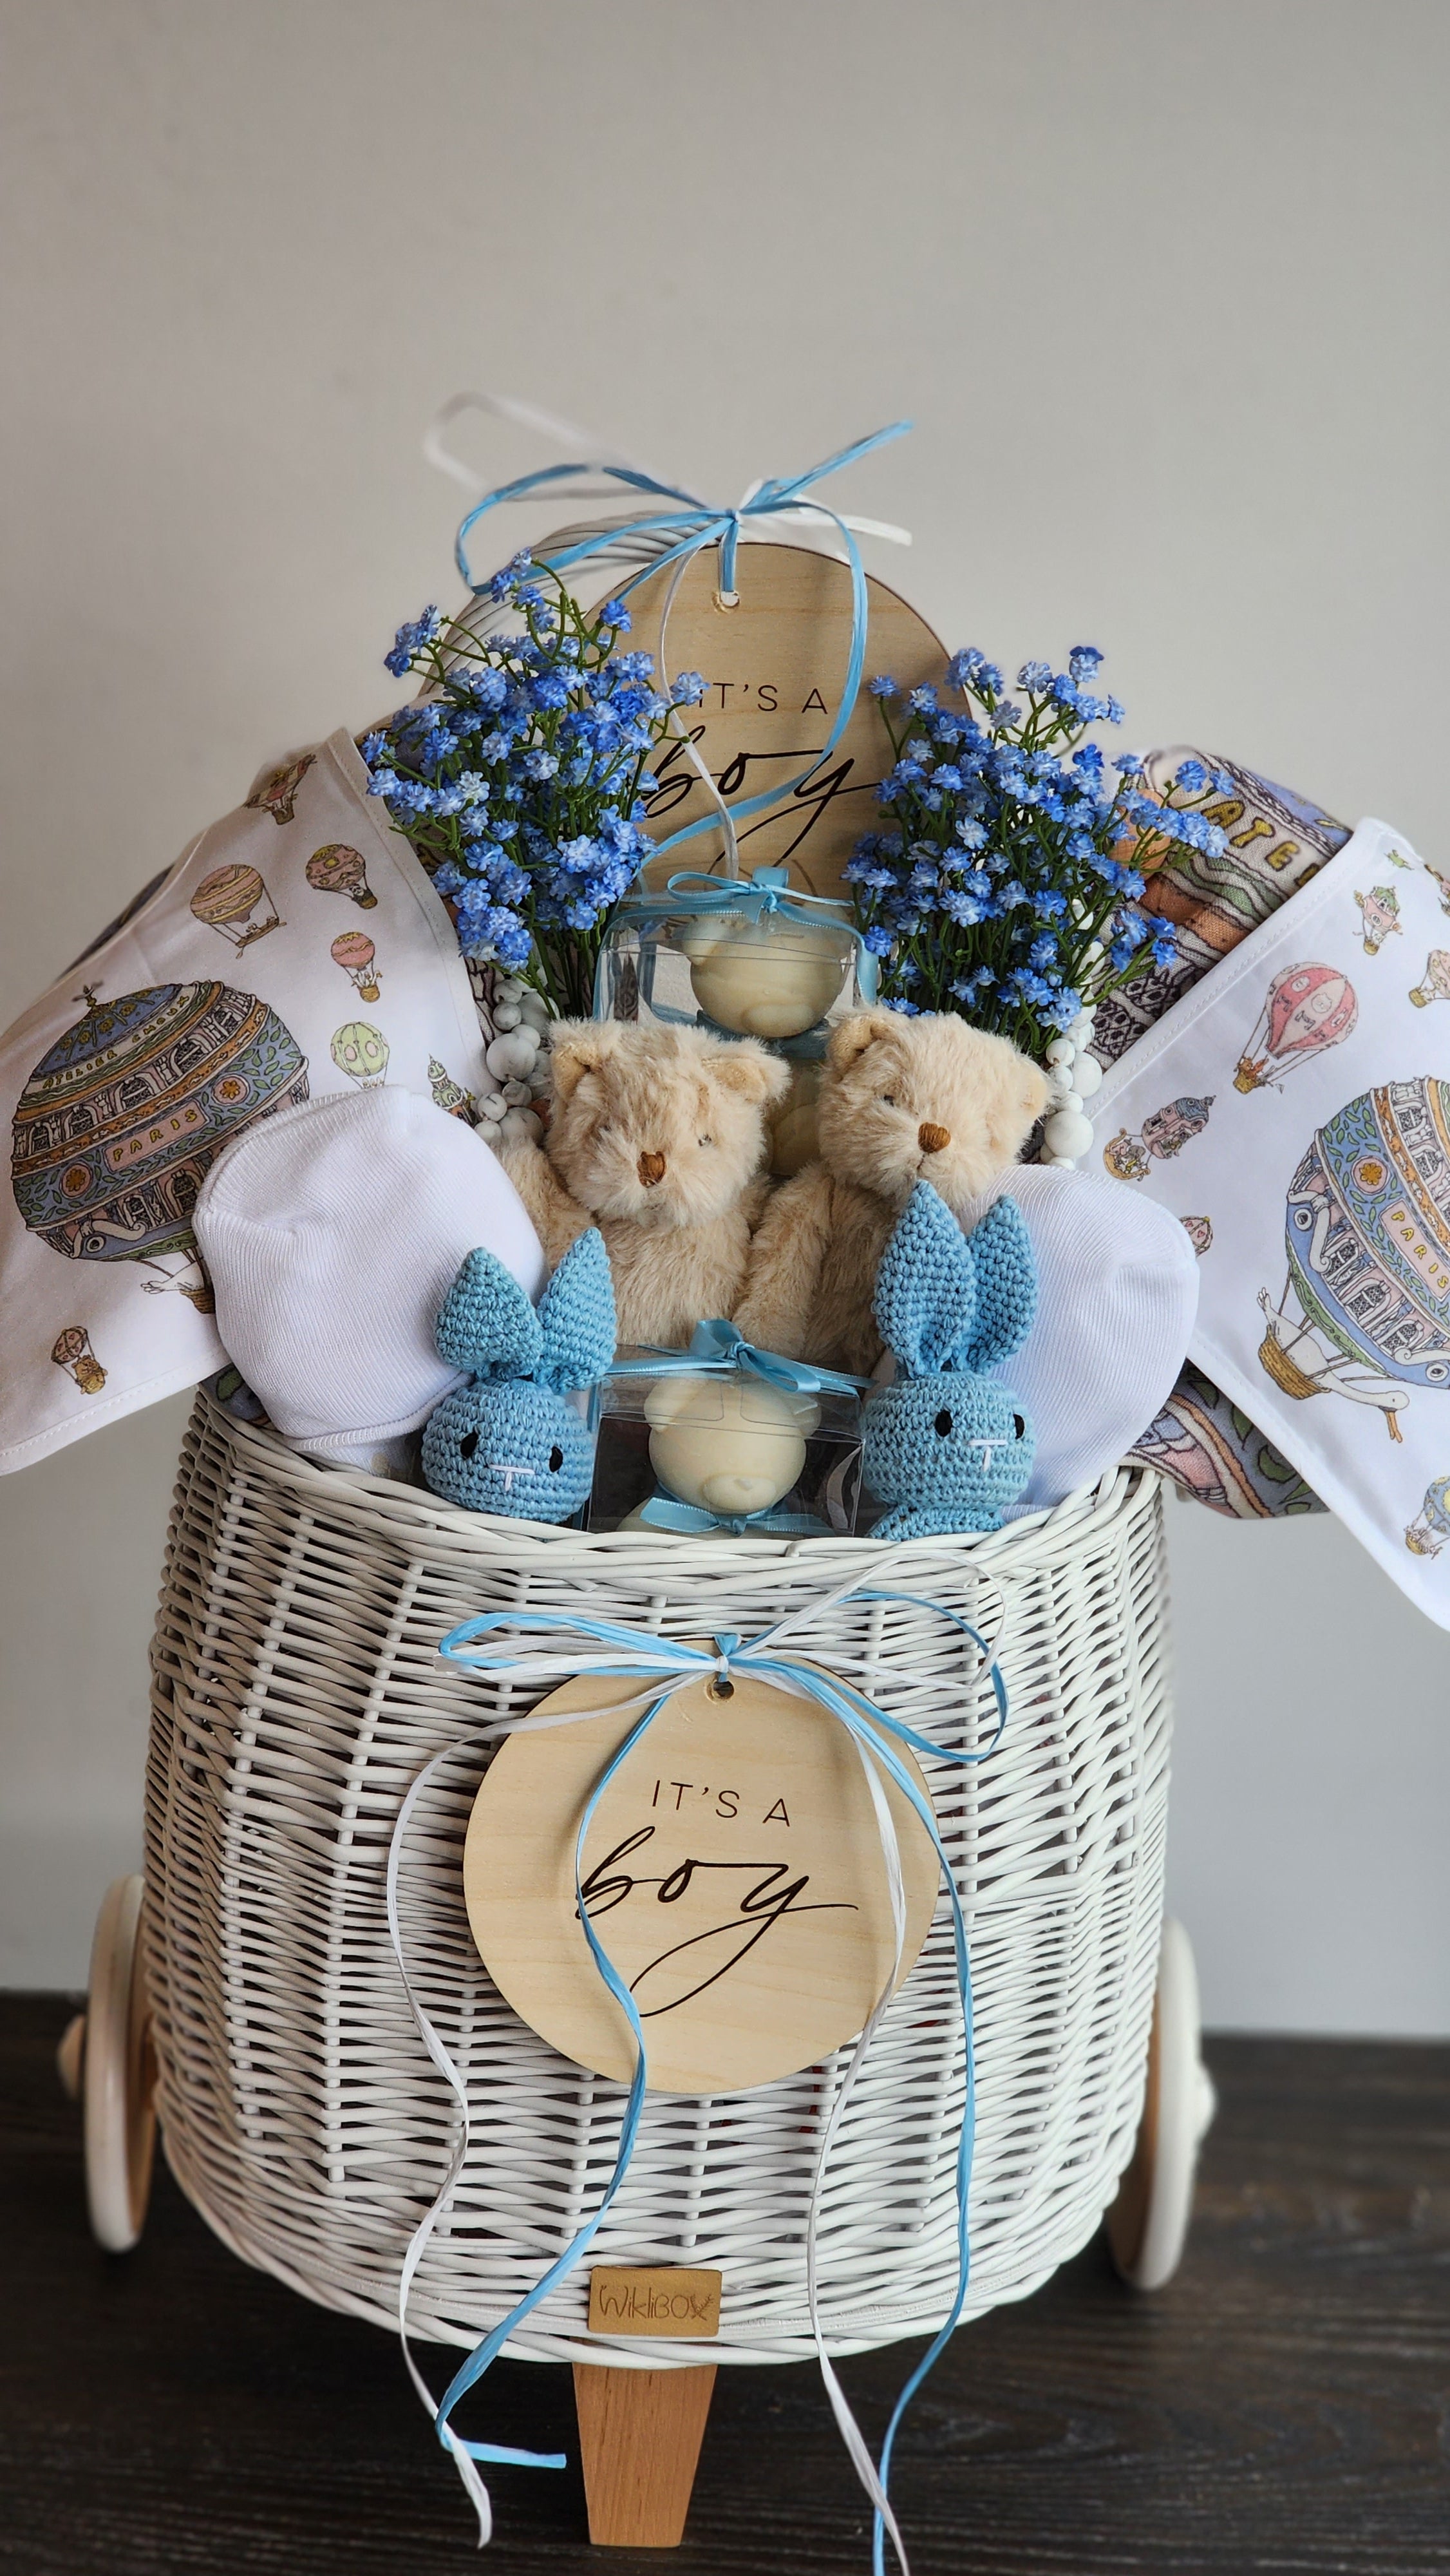 Gift Package In 2 Wheel Carriage - Baby Boy